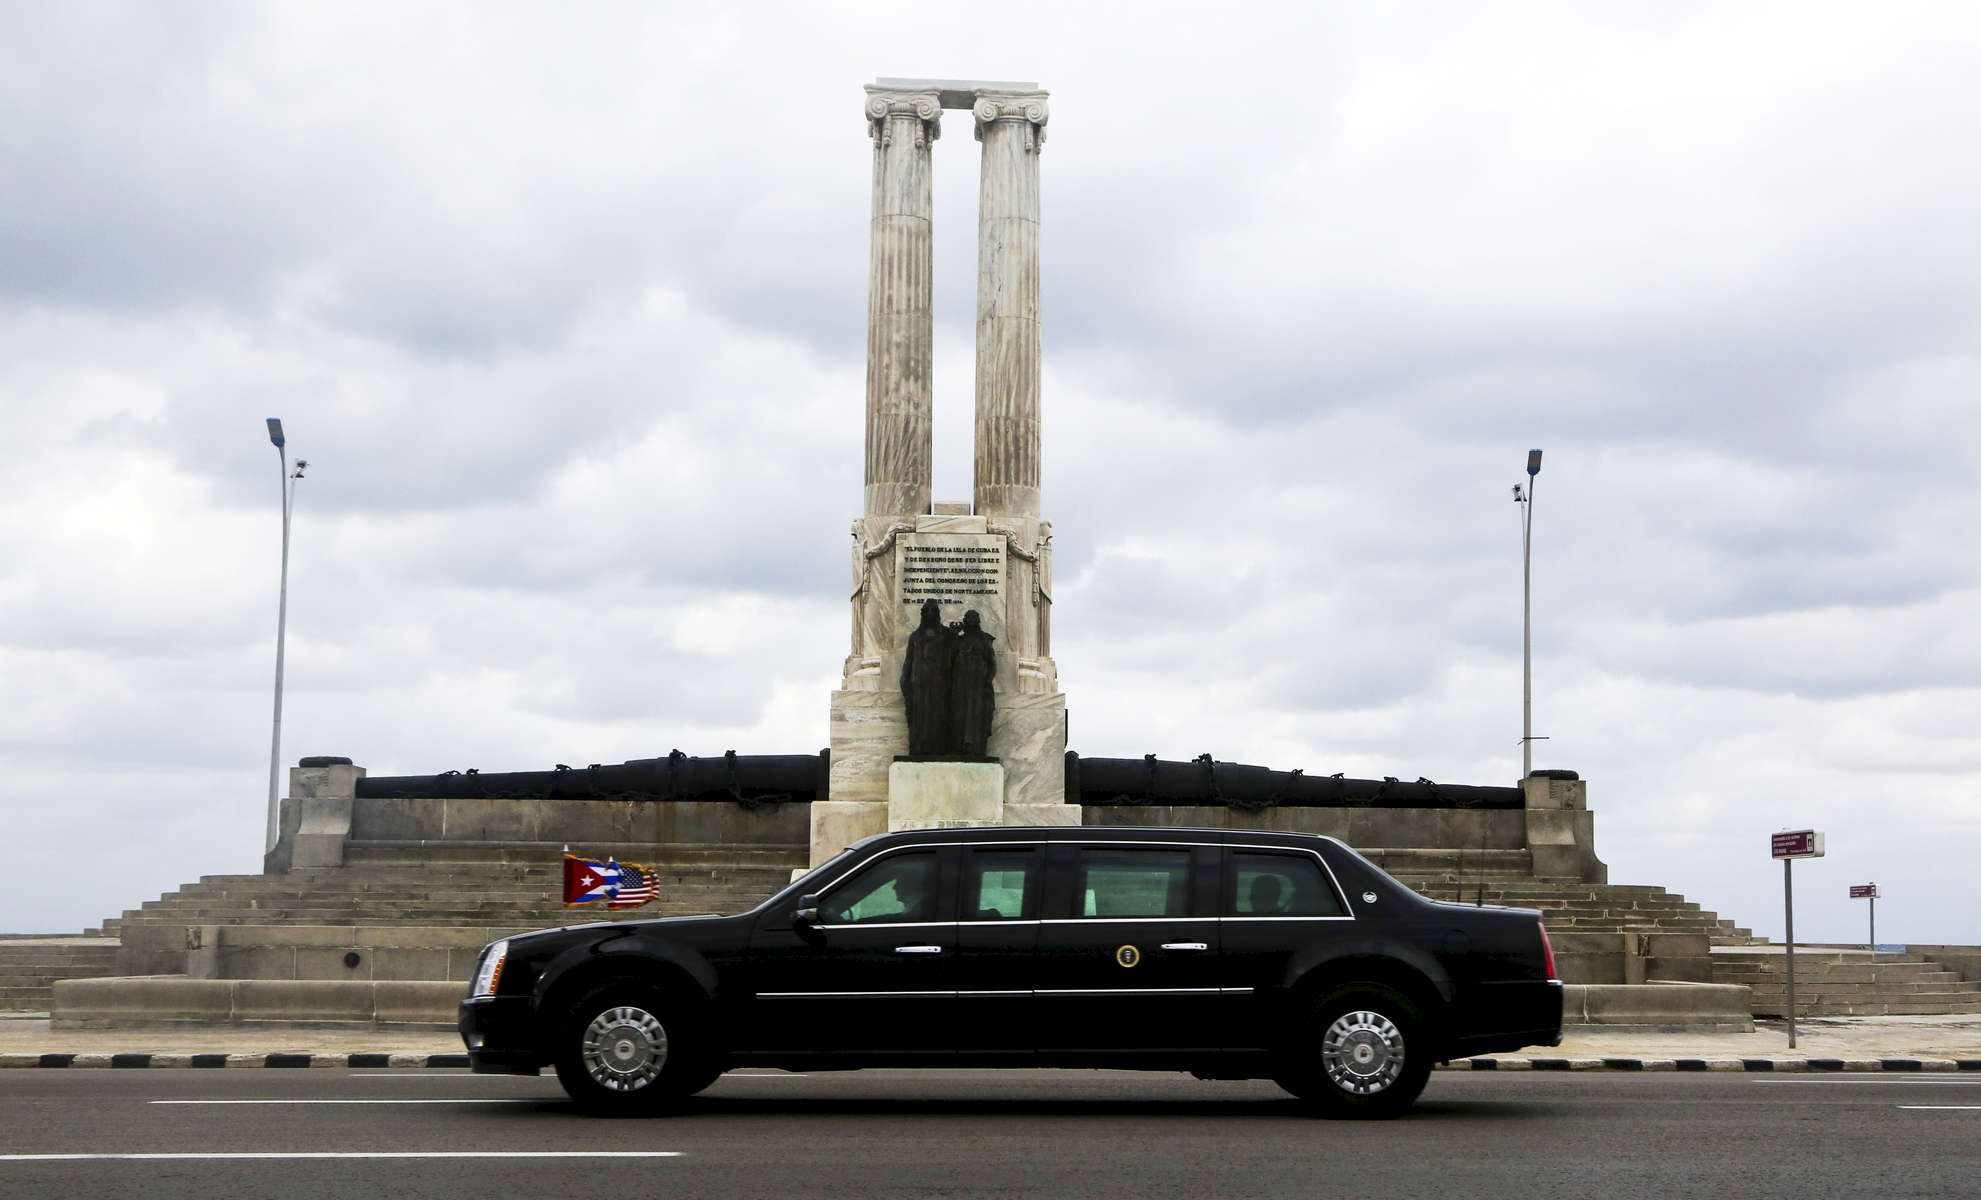 US Presidential motorcade drives on the Malecòn boulevard in Havana, Cuba. US President Barack Obama is doing a visit in Cuba, the first in 88 years by an American President. 